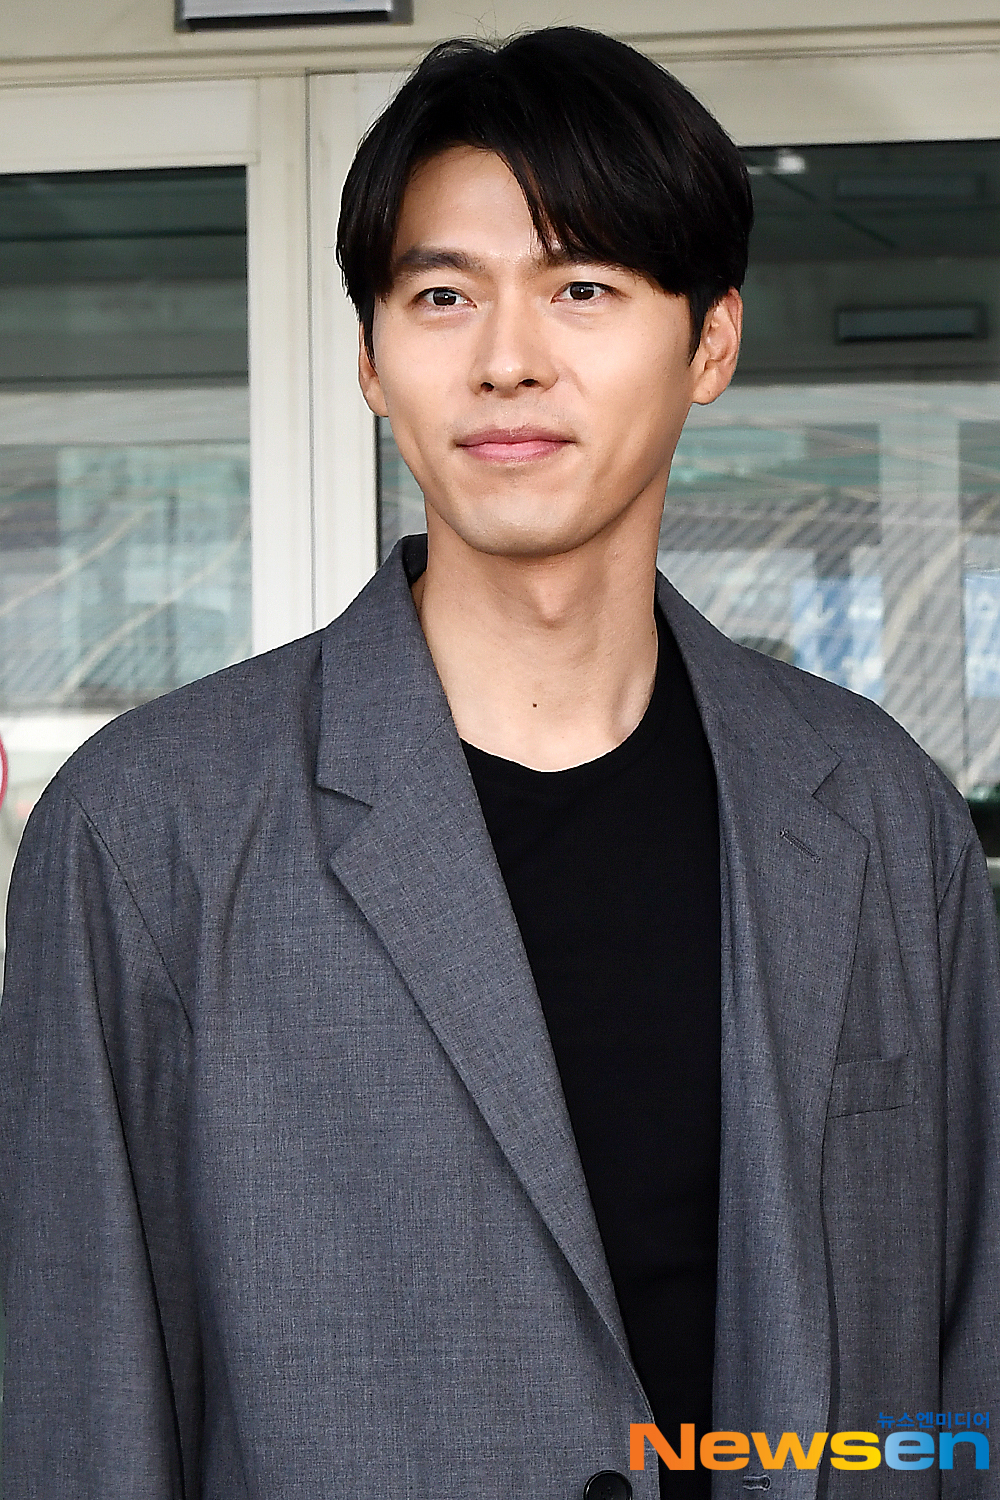 Actor Hyun Bin departed for Hong Kong on May 10 afternoon for a schedule for overseas fan meetings of LOG INTO THE SPACE -2019 Hyun Bin Fan Meeting Tour - in Hong Kong held in Hong Kong through Incheon International Airport in Unseo-dong, Jung-gu, Incheon.Actor Hyun Bin is leaving for Hong Kong with an airport fashion.exponential earthquake